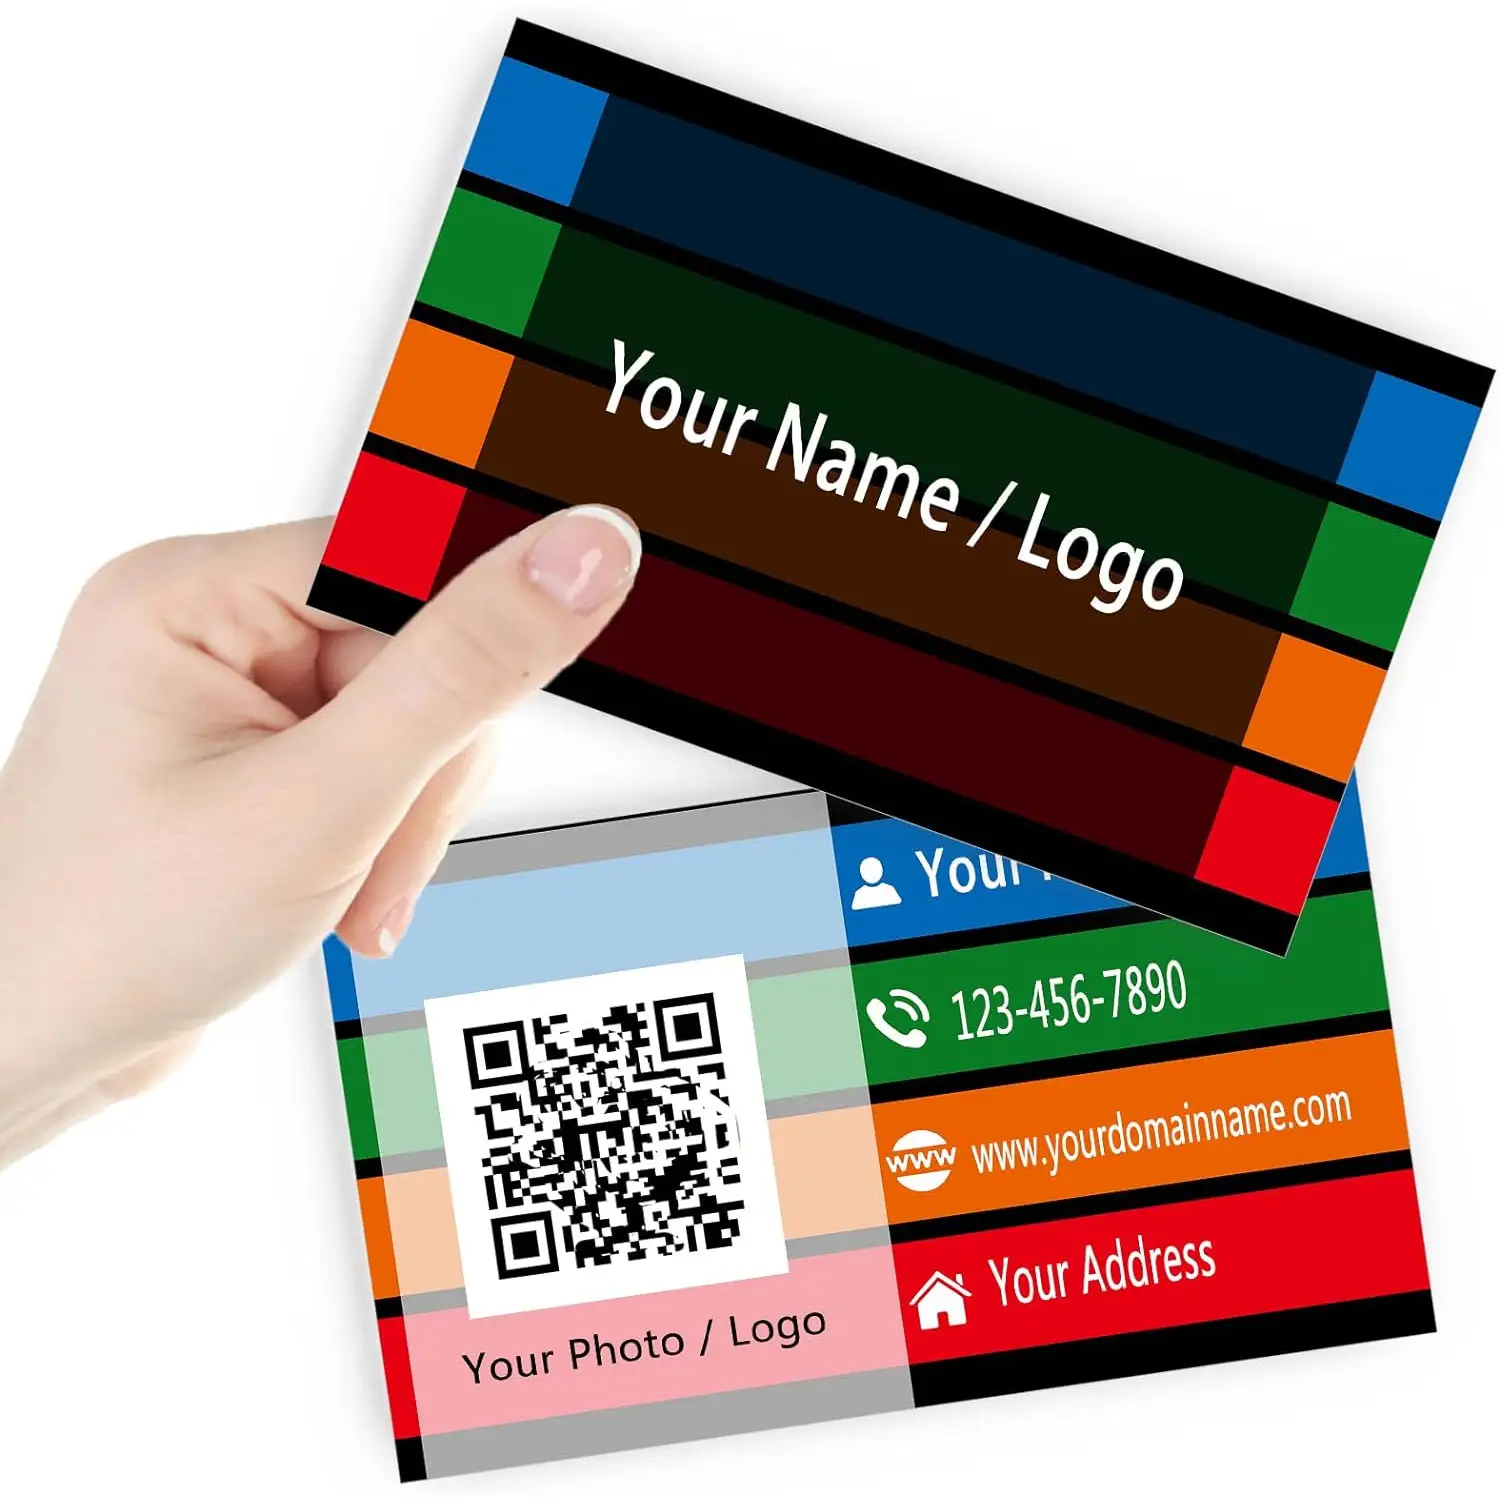 Make A Statement Customized Business Cards On Thick, Waterproof Paper Great Pride Good Quality Products Business Cards